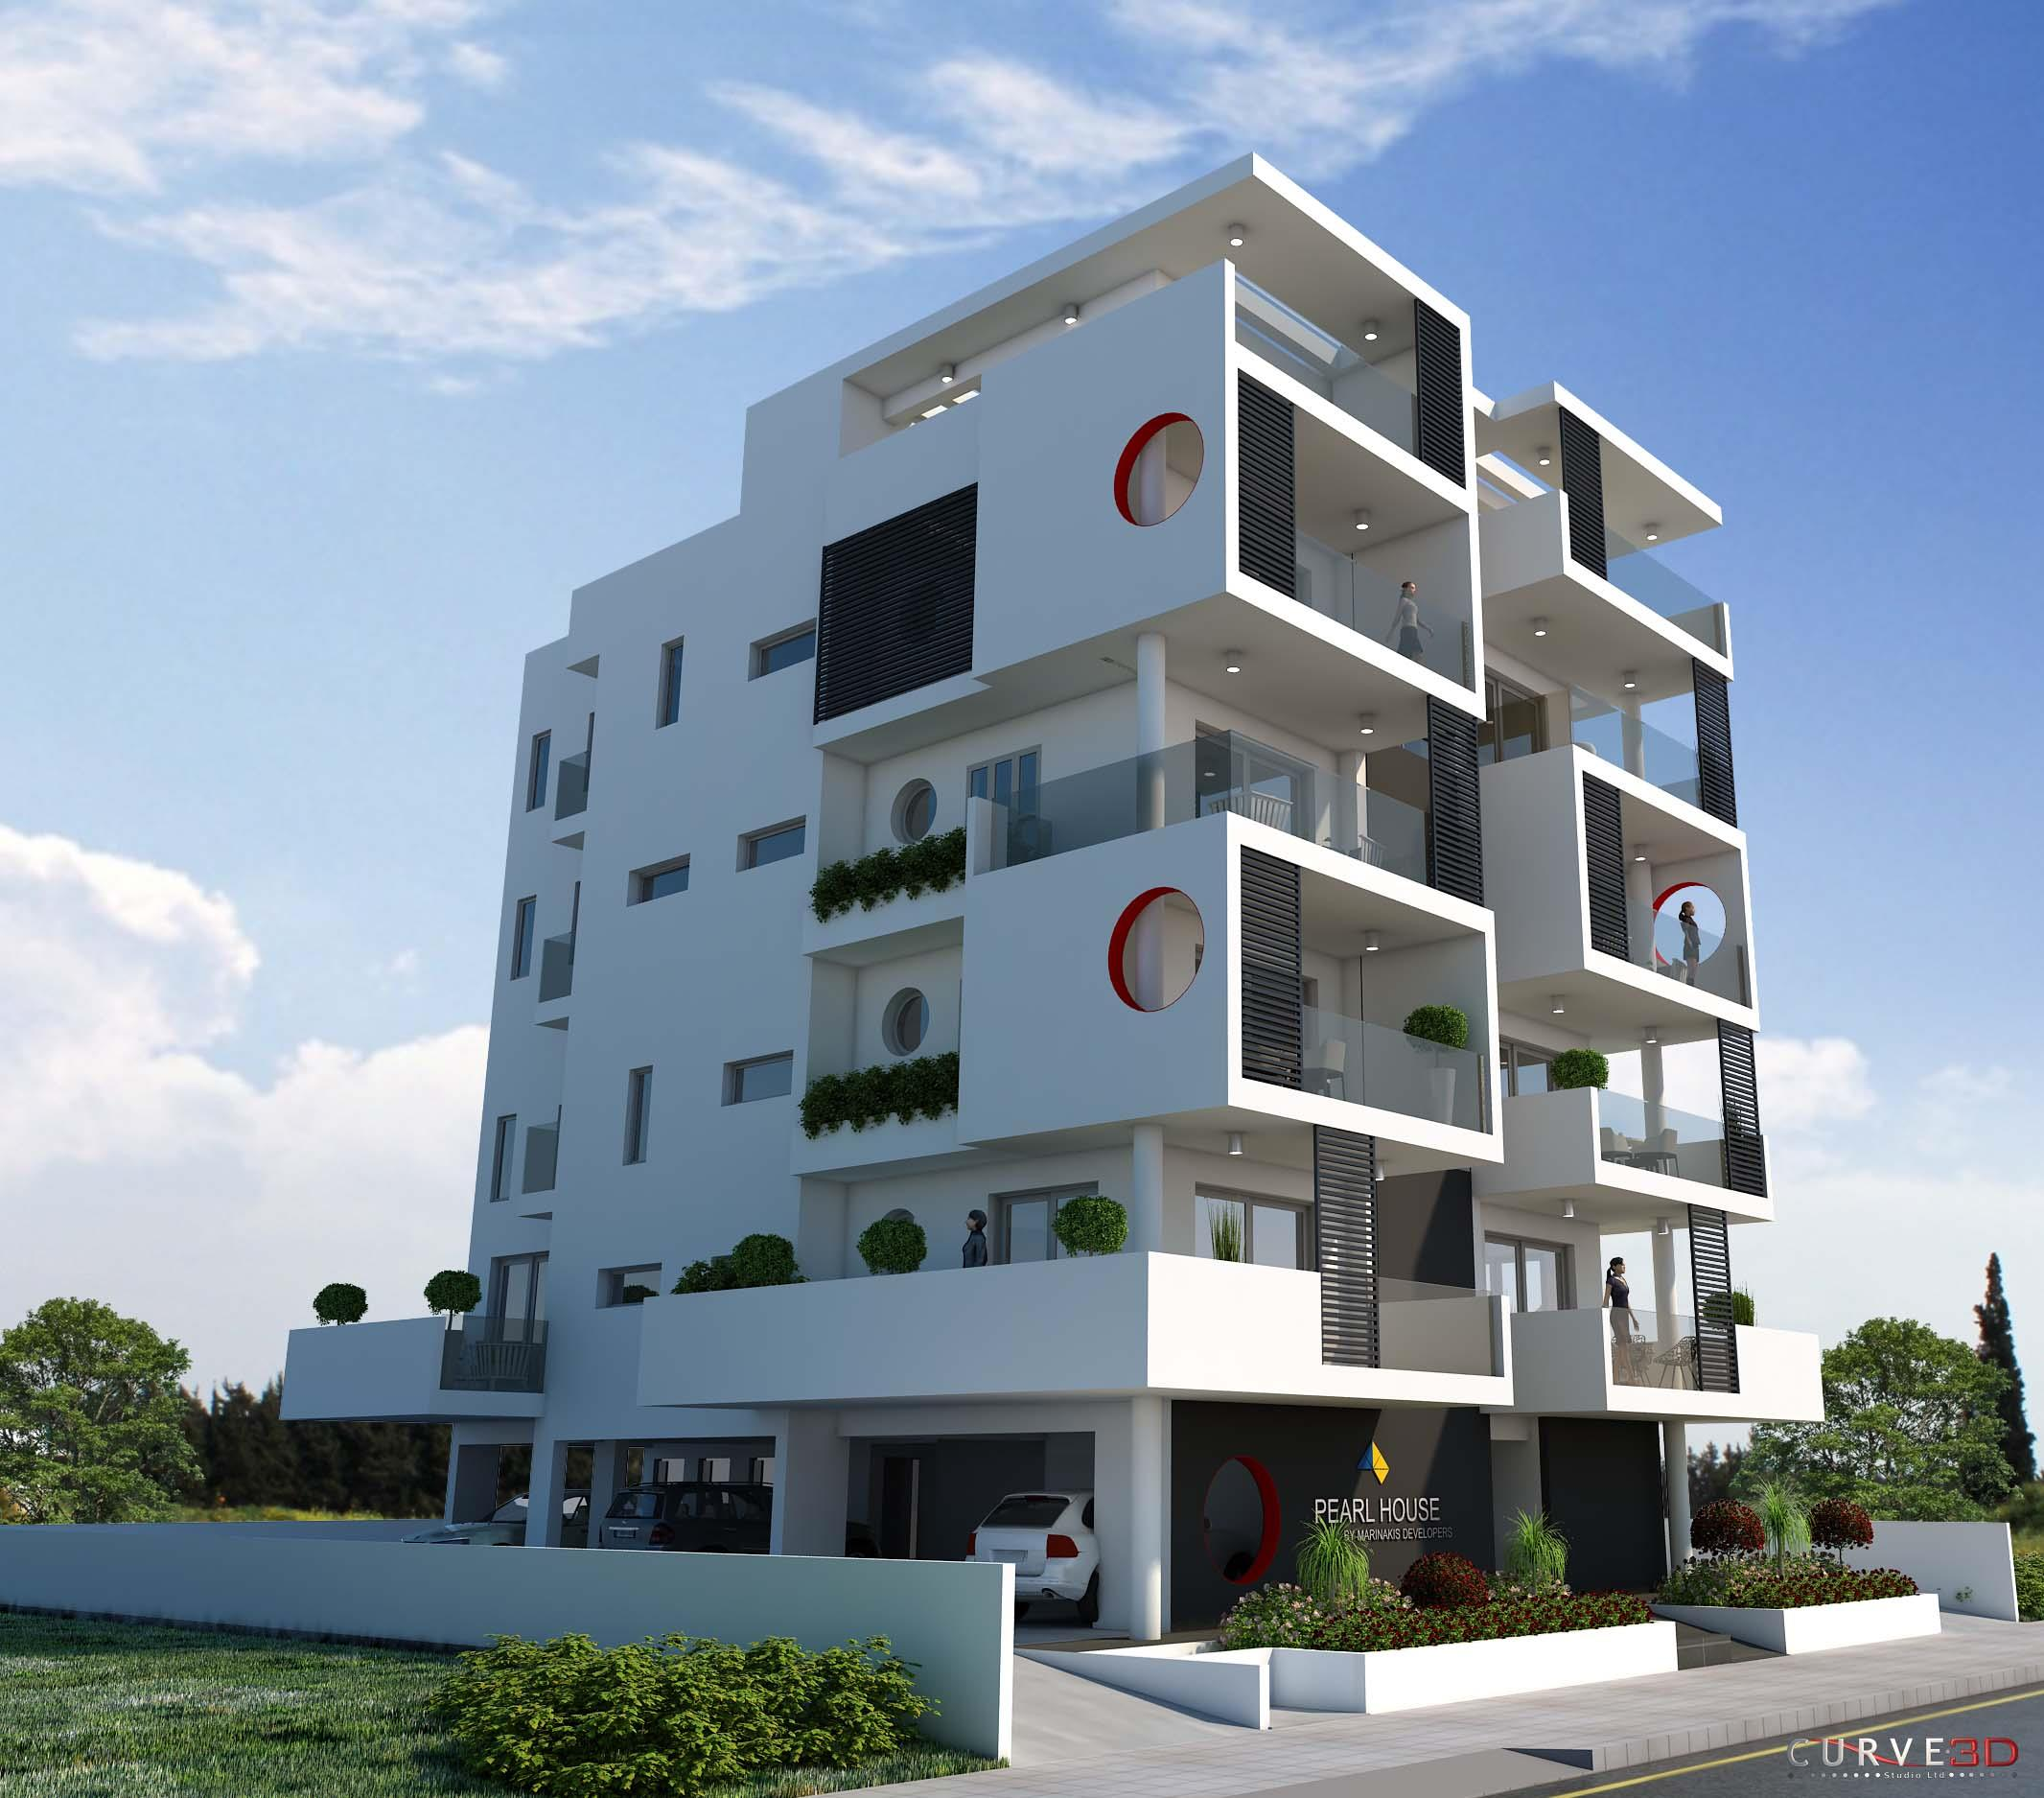 8 Deluxe Apartments off-plan at Larnaca SALE PRICE: 1,500 000 EURO We can propose you an additional